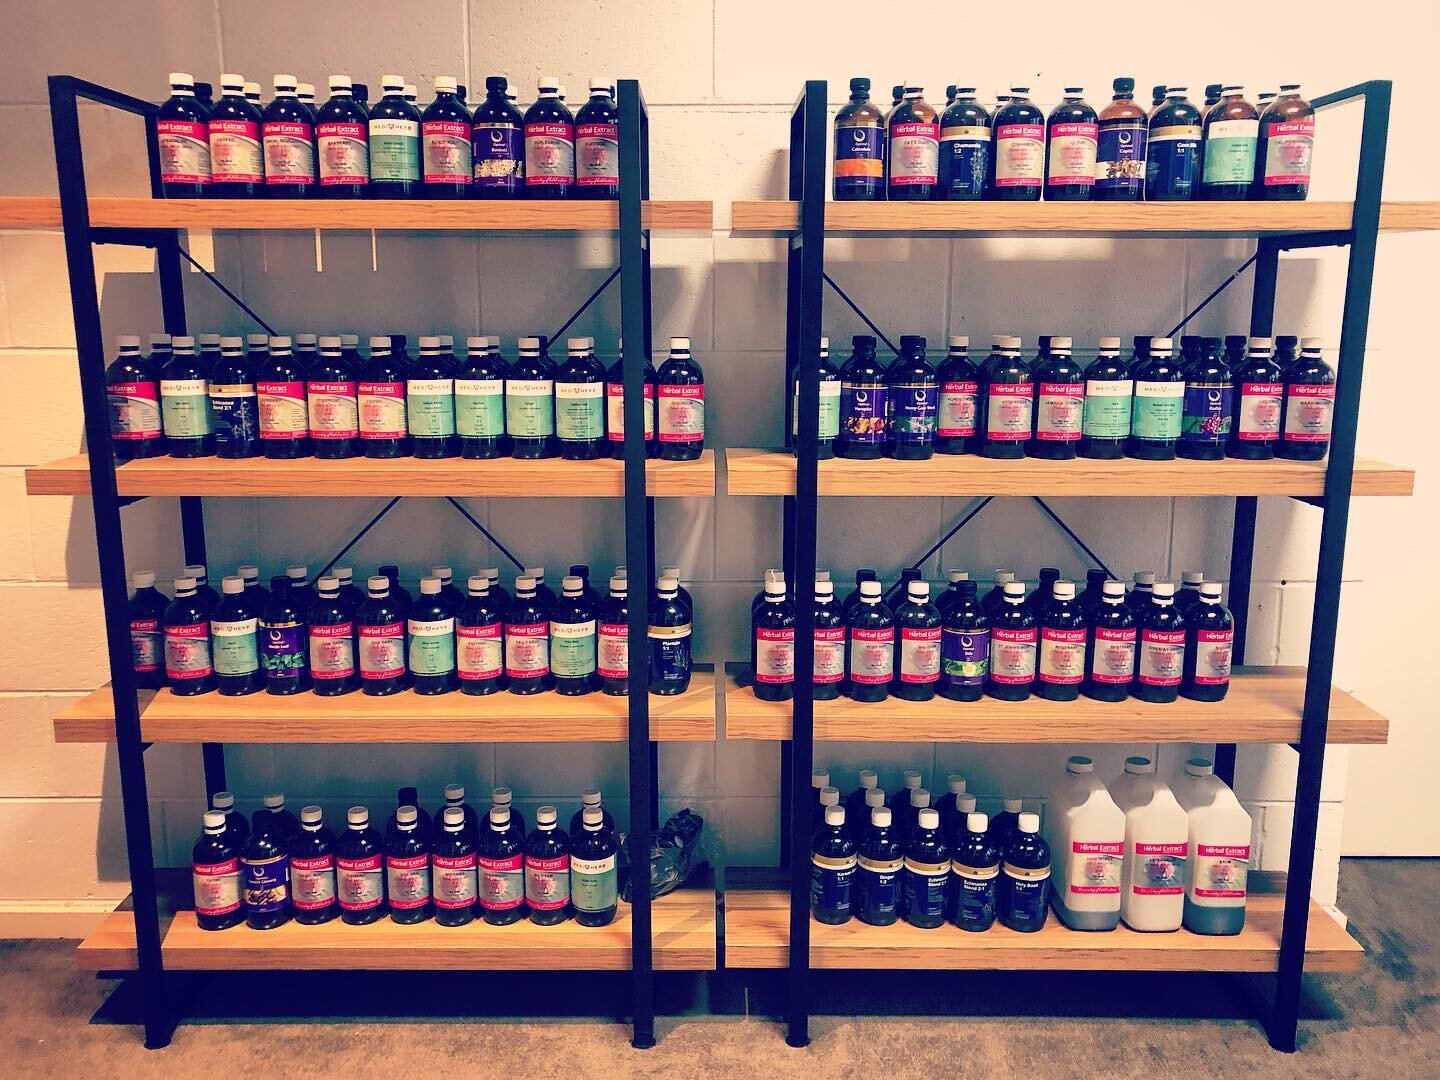 One of the core elements of my naturopathy practice is liquid herbal prescribing. This is my liquid herbal dispensary, which allows me to individualise a herbal prescription by combining several synergistic herbs into one formula. This enables a more